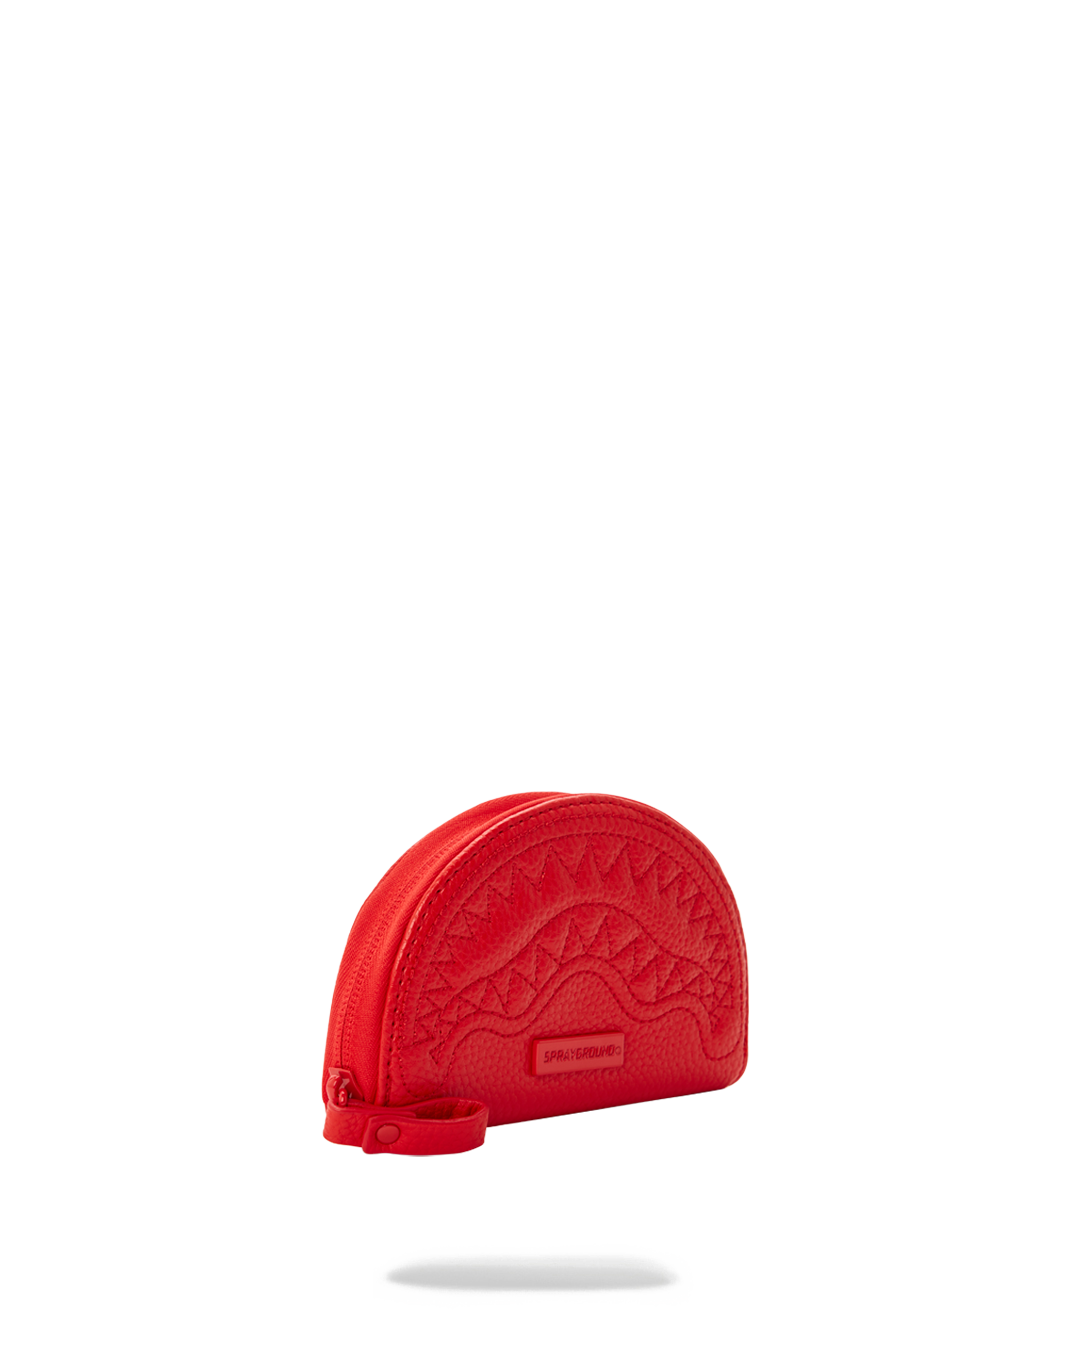 RED RIVIERA SHARK COIN POUCH